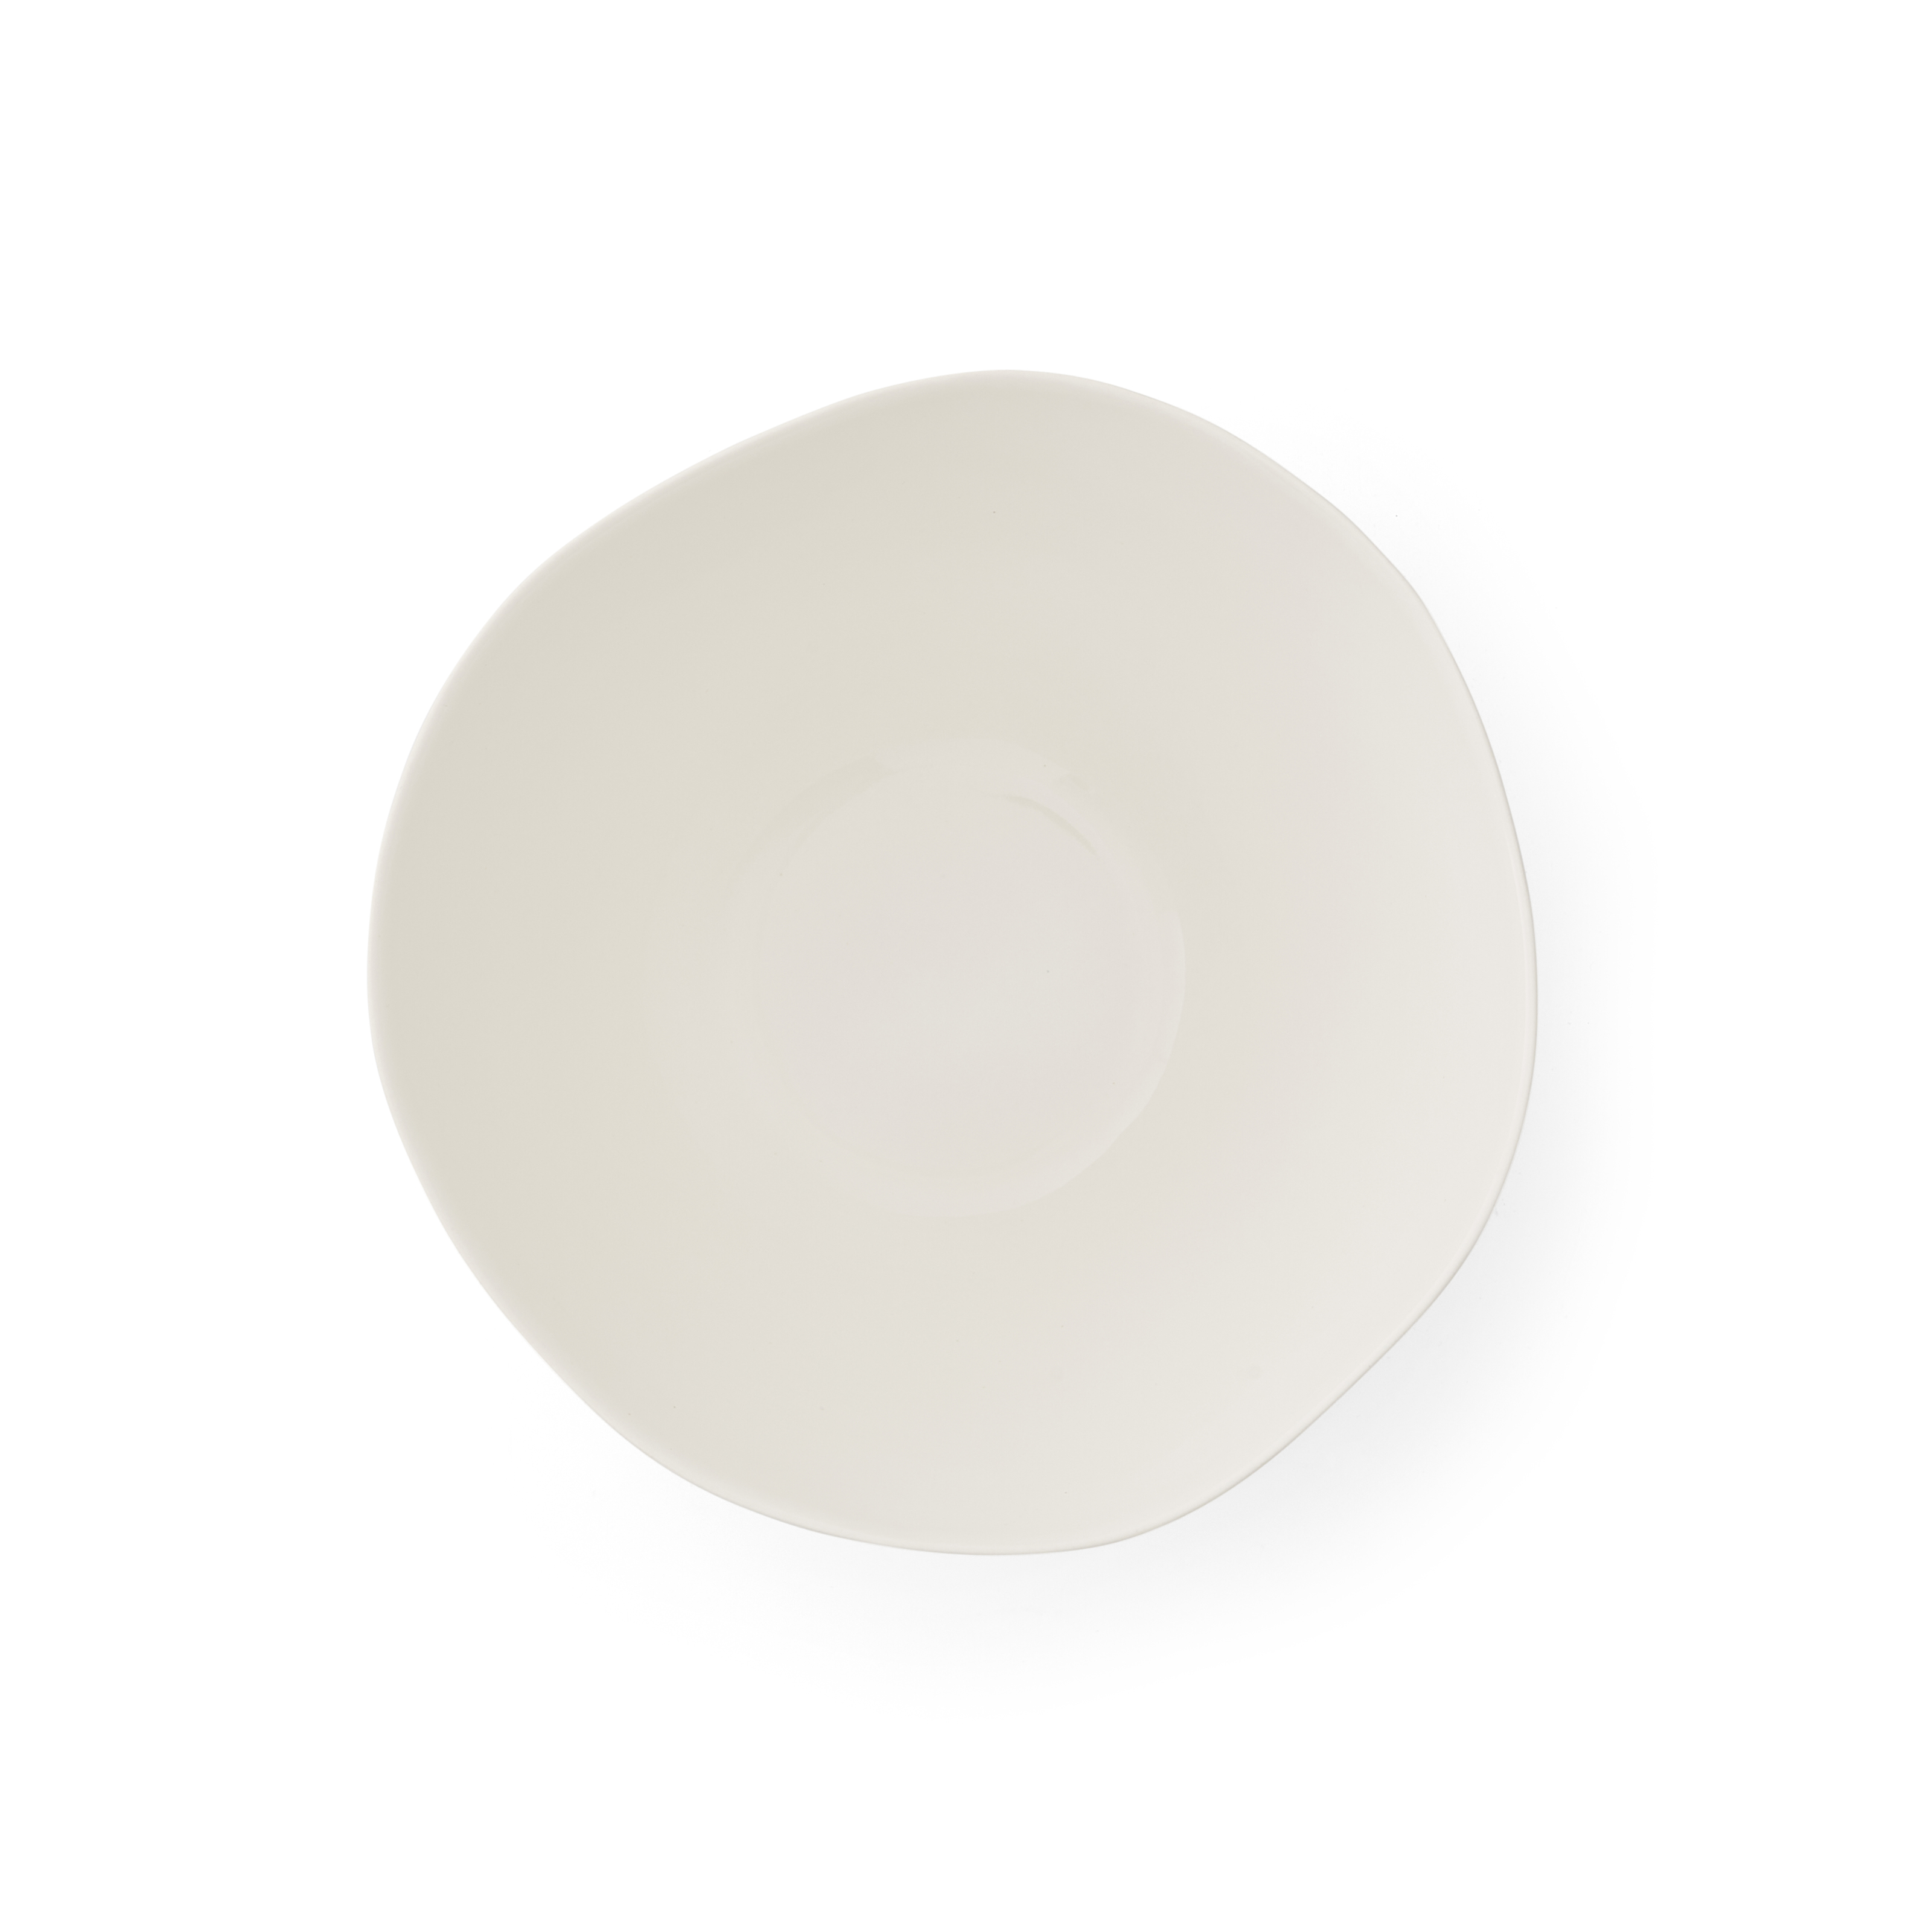 Sophie Conran Arbor Large Serving Bowl-Creamy White image number null